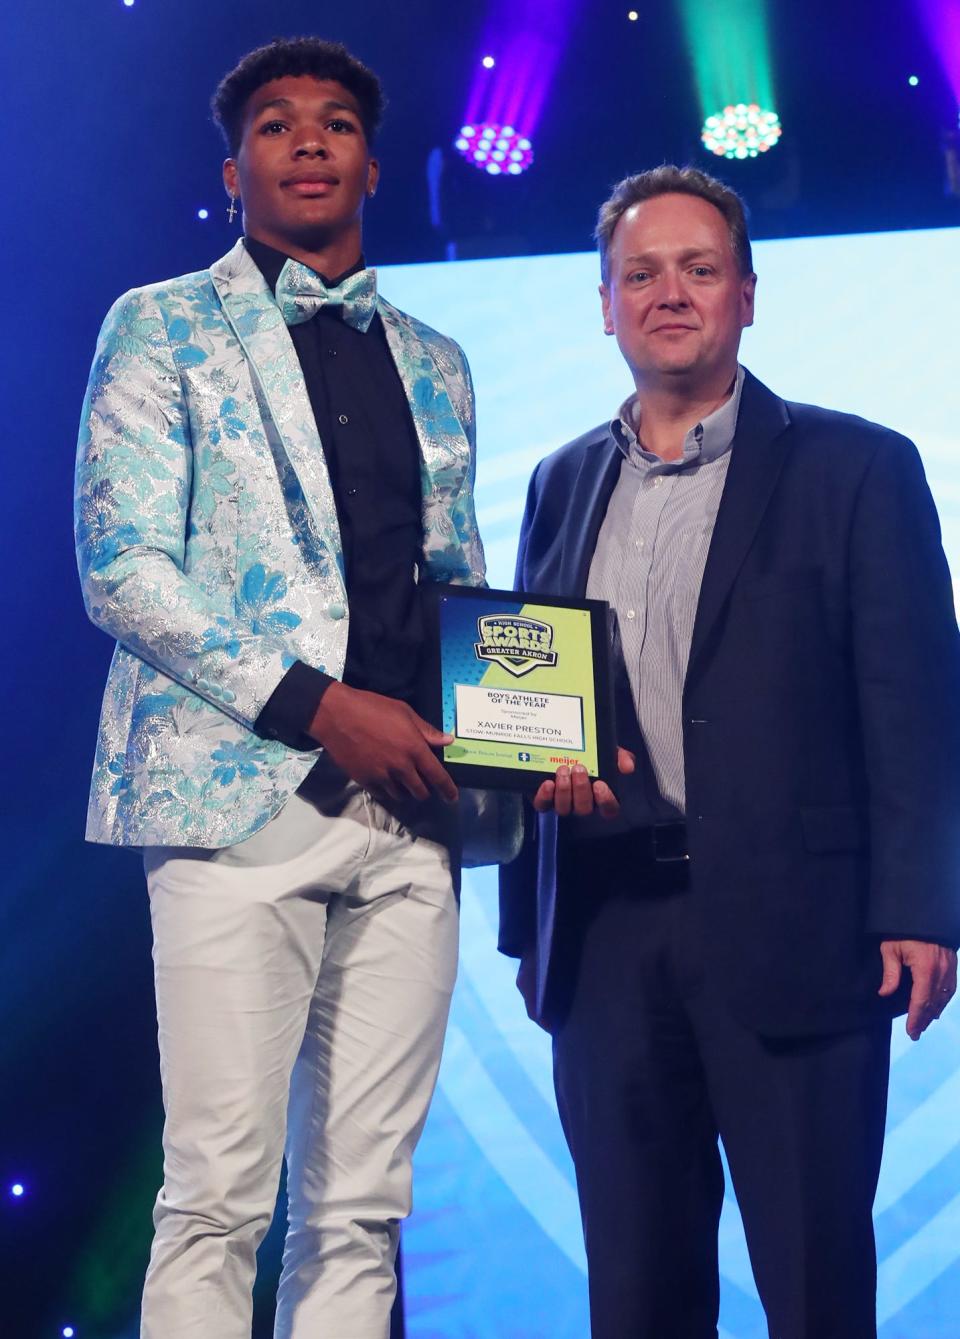 Stow-Munroe Falls' Xavier Preston Greater Akron Male Athlete of the Year poses with Beacon Journal editor Michael Shearer at the High School Sports All-Star Awards at the Civic Theatre in Akron on Friday.